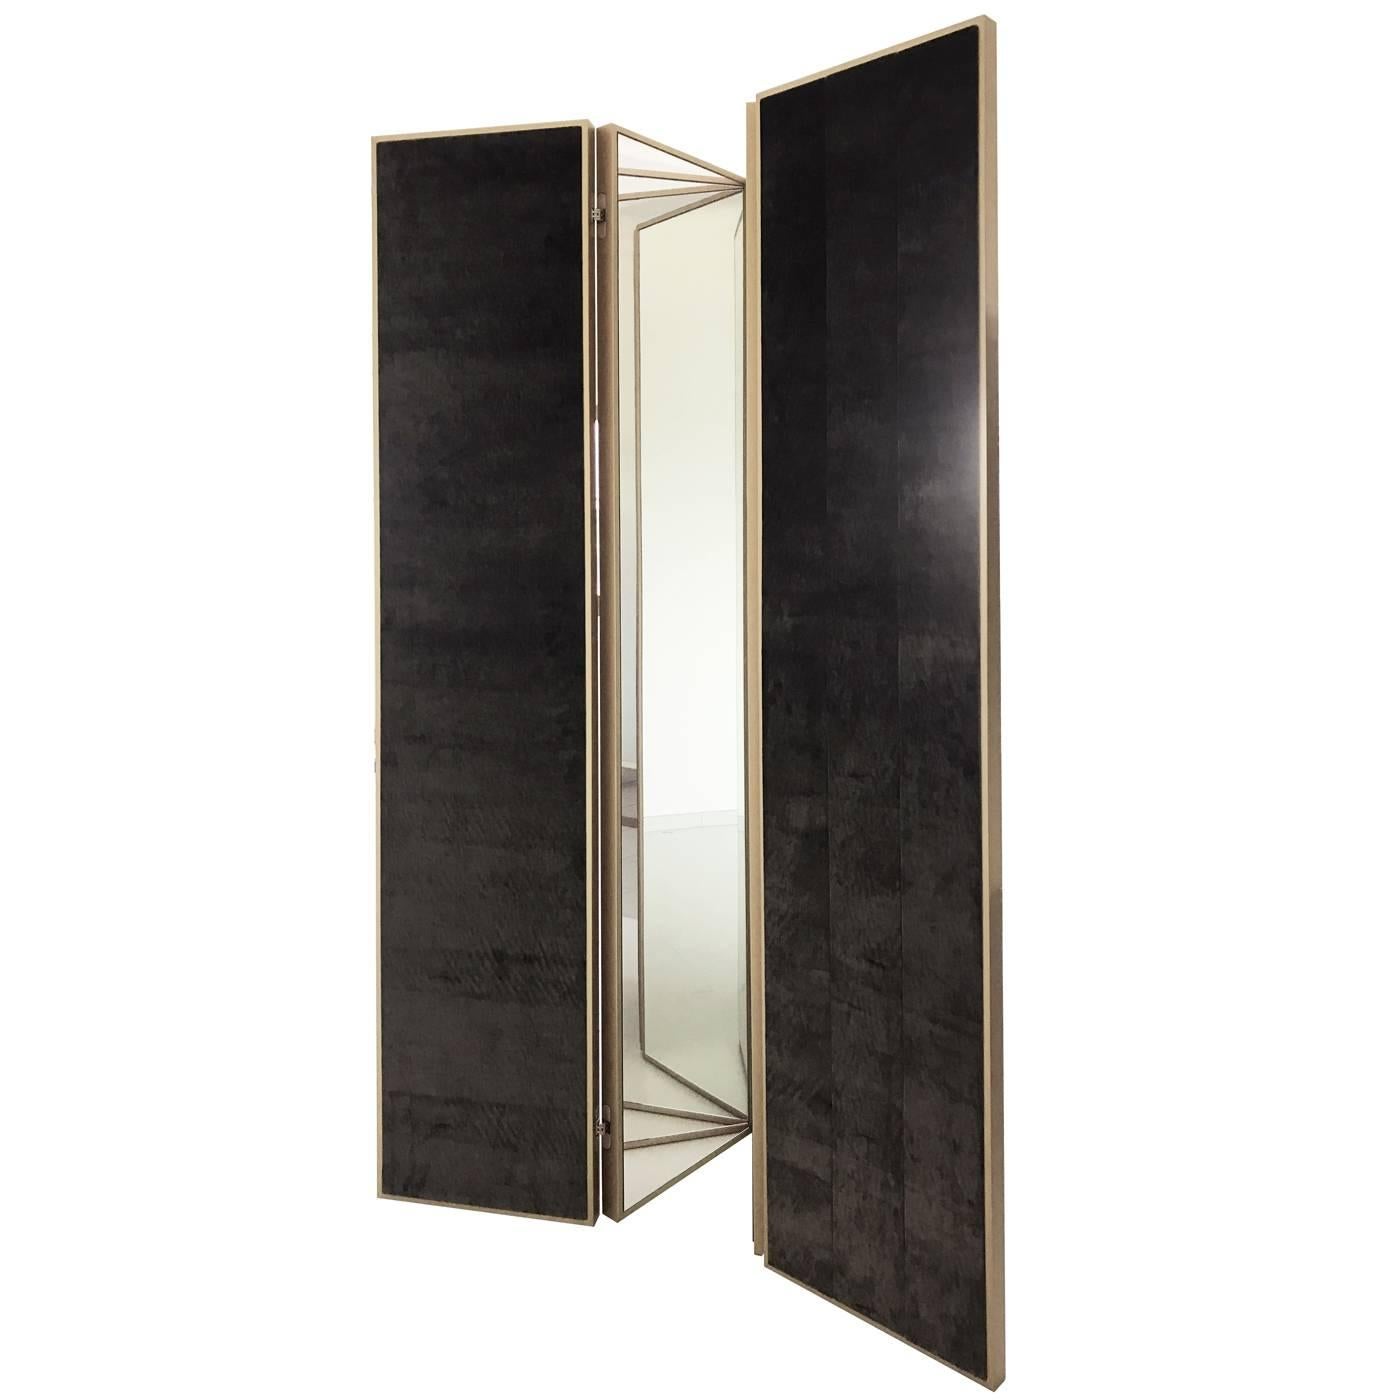 This magnificent screen was crafted by expert artisans and will be a splendid addition to any room, thanks to its exquisite craftsmanship and the sophisticated allure of its Silhouette that evokes the charm of the Art Deco style. The structure is in